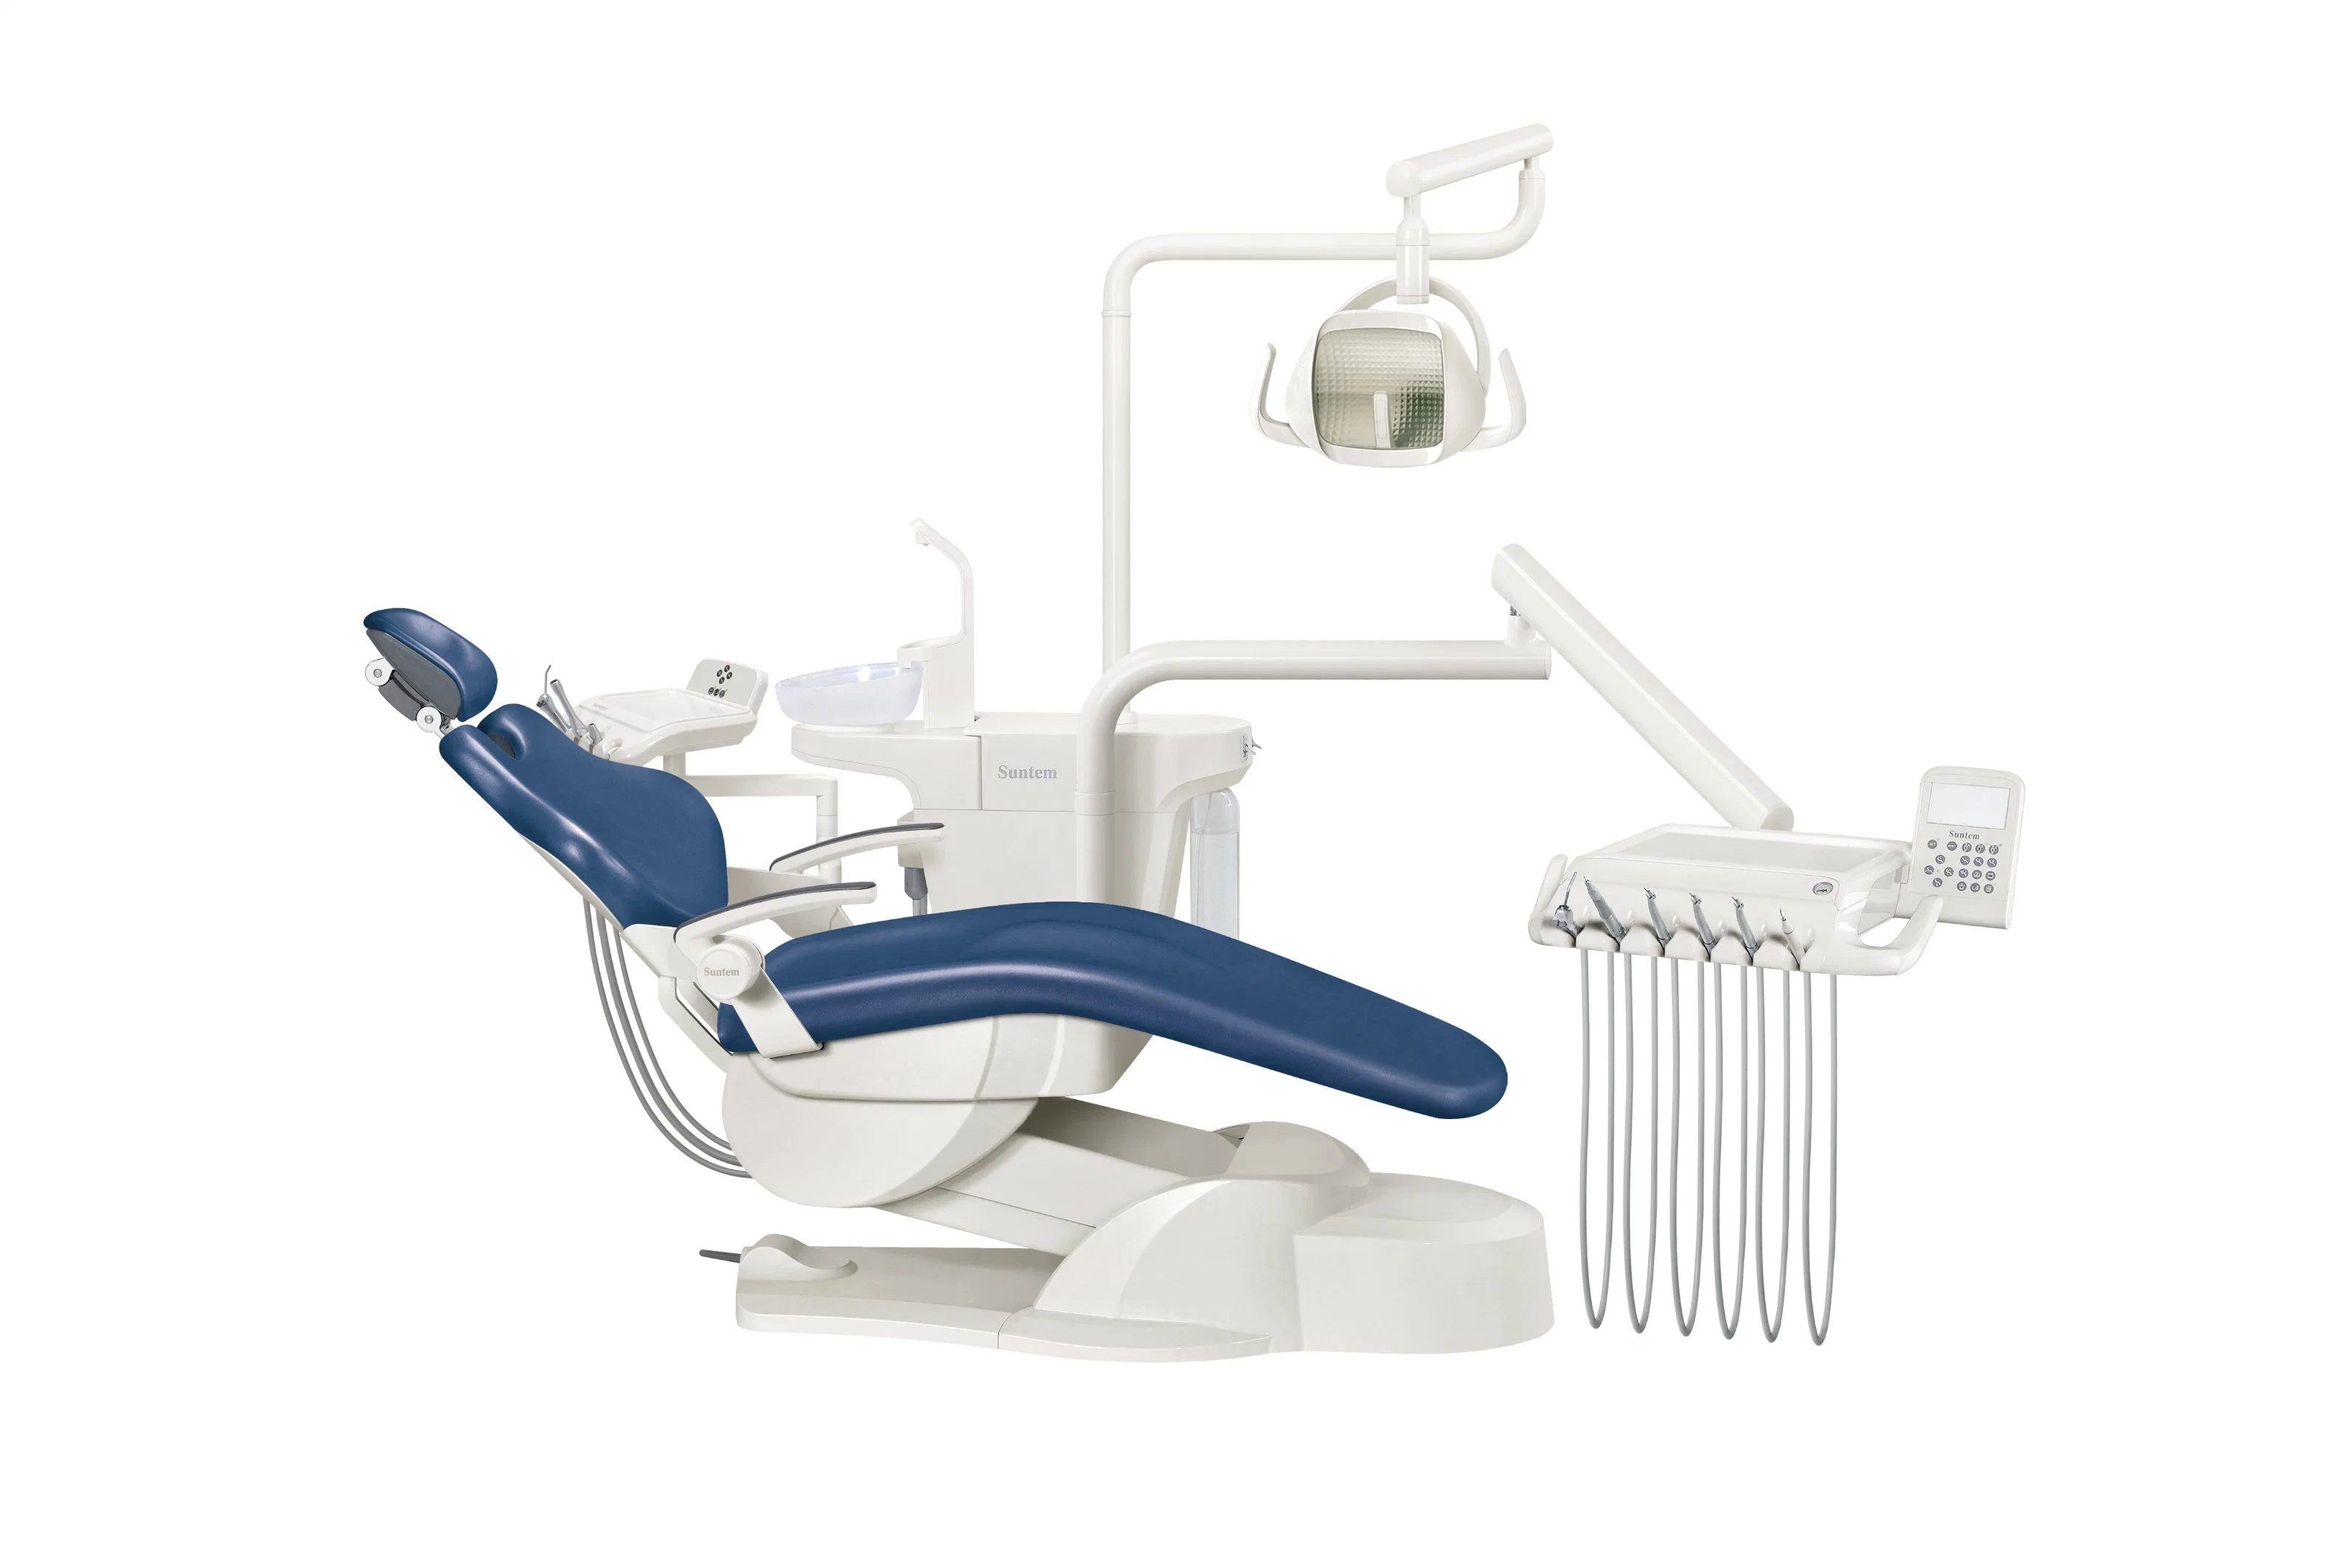 Suntem Dental Unit Factory Direct Supply Medical Integral with CE Approved//Safety/Disinfection/Multi-Colored